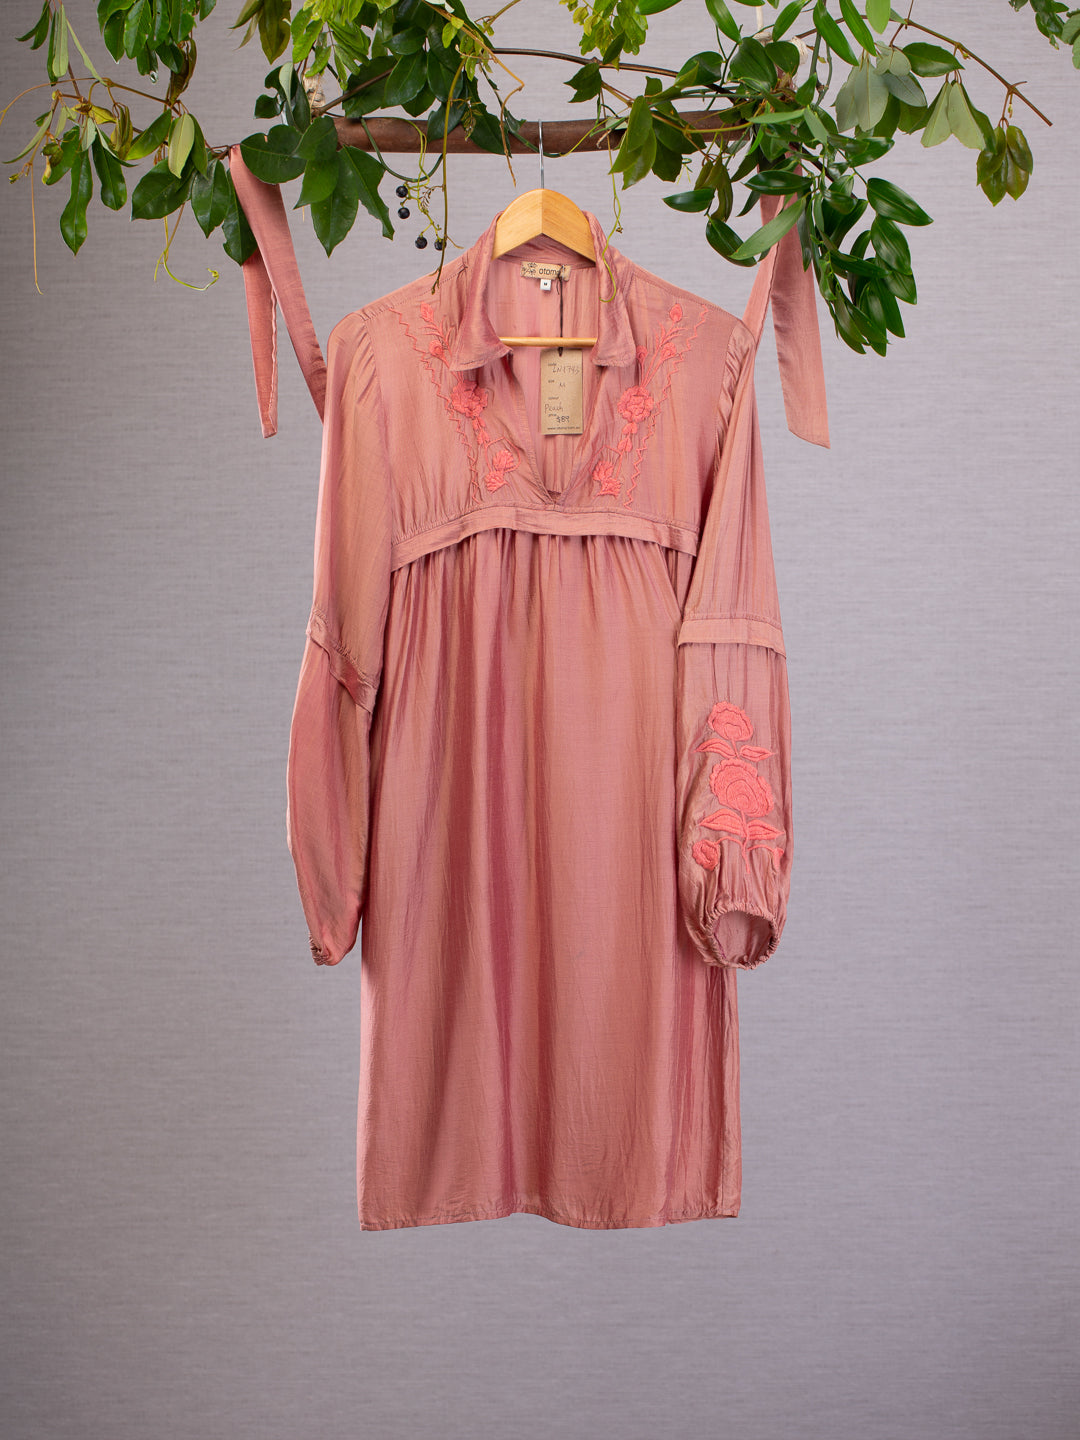 This light and flowing blend of materials compliments the cut of this comfortable dress, flower designs are subtley embroidered on the sleeve and collar in peach thread. Dress hanging from vines